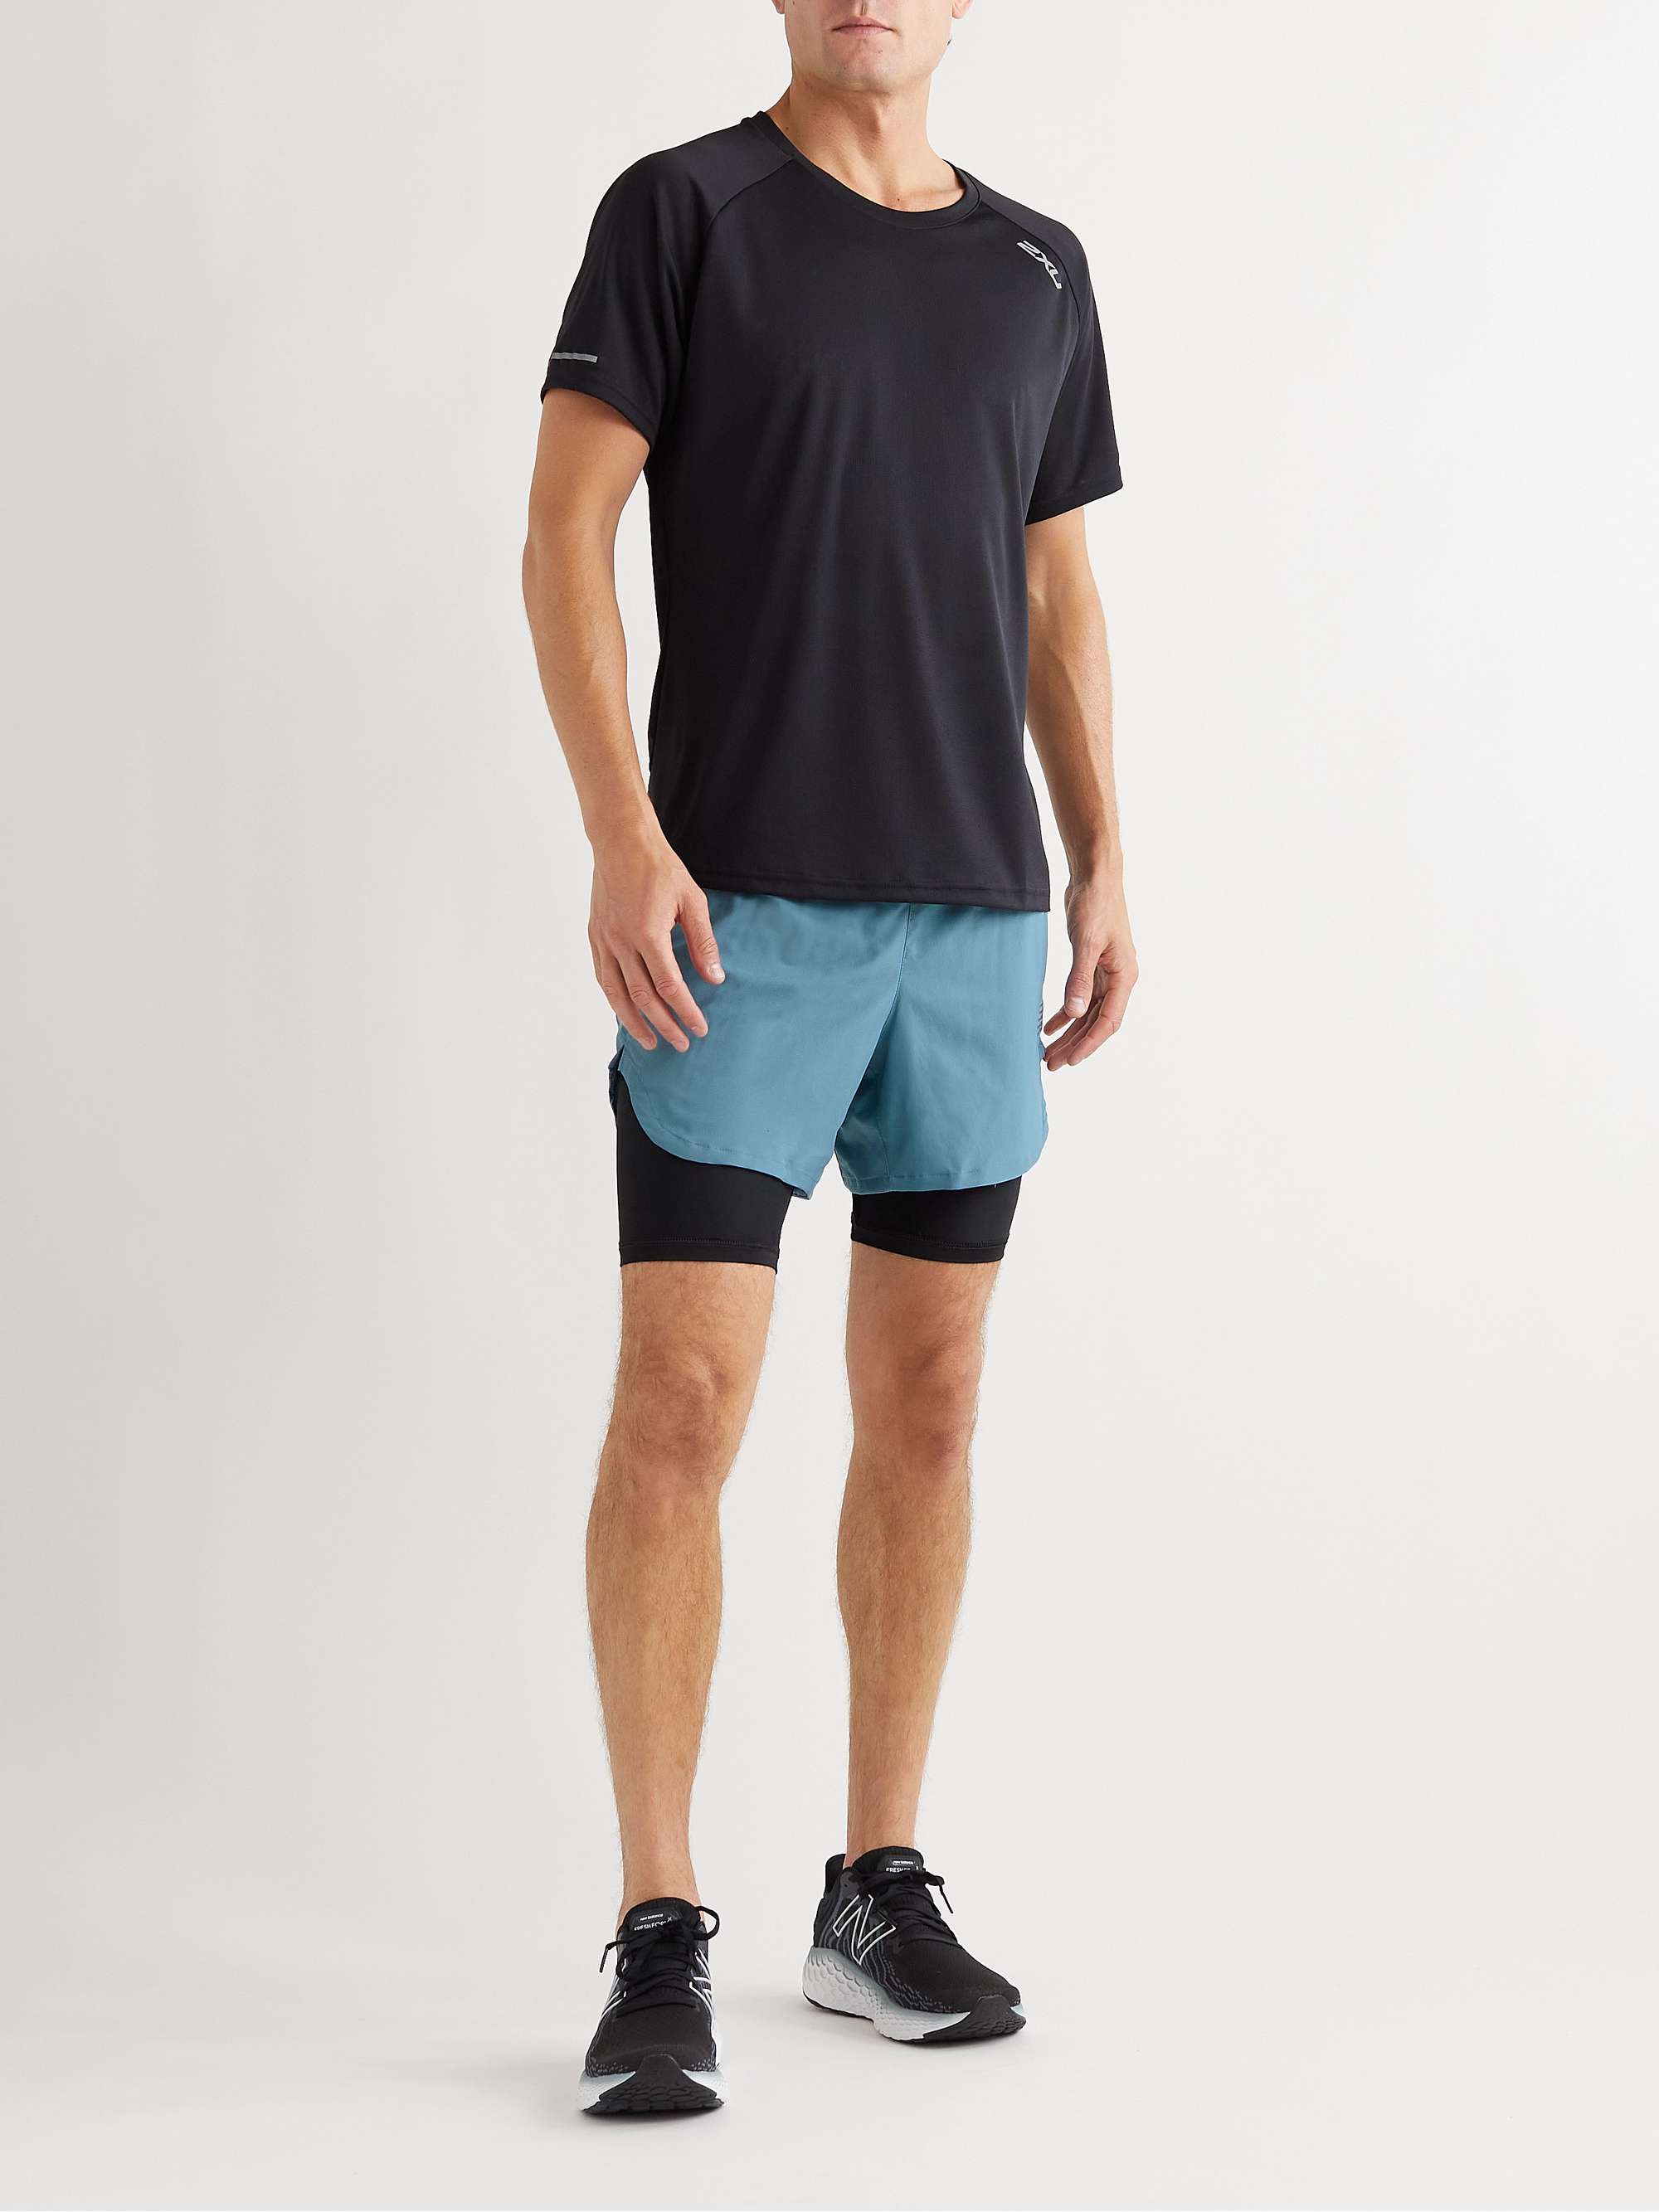 NEW BALANCE Q Speed Fuel Slim-Fit 2-in-1 NB DRY and Stretch-Jersey Shorts |  MR PORTER